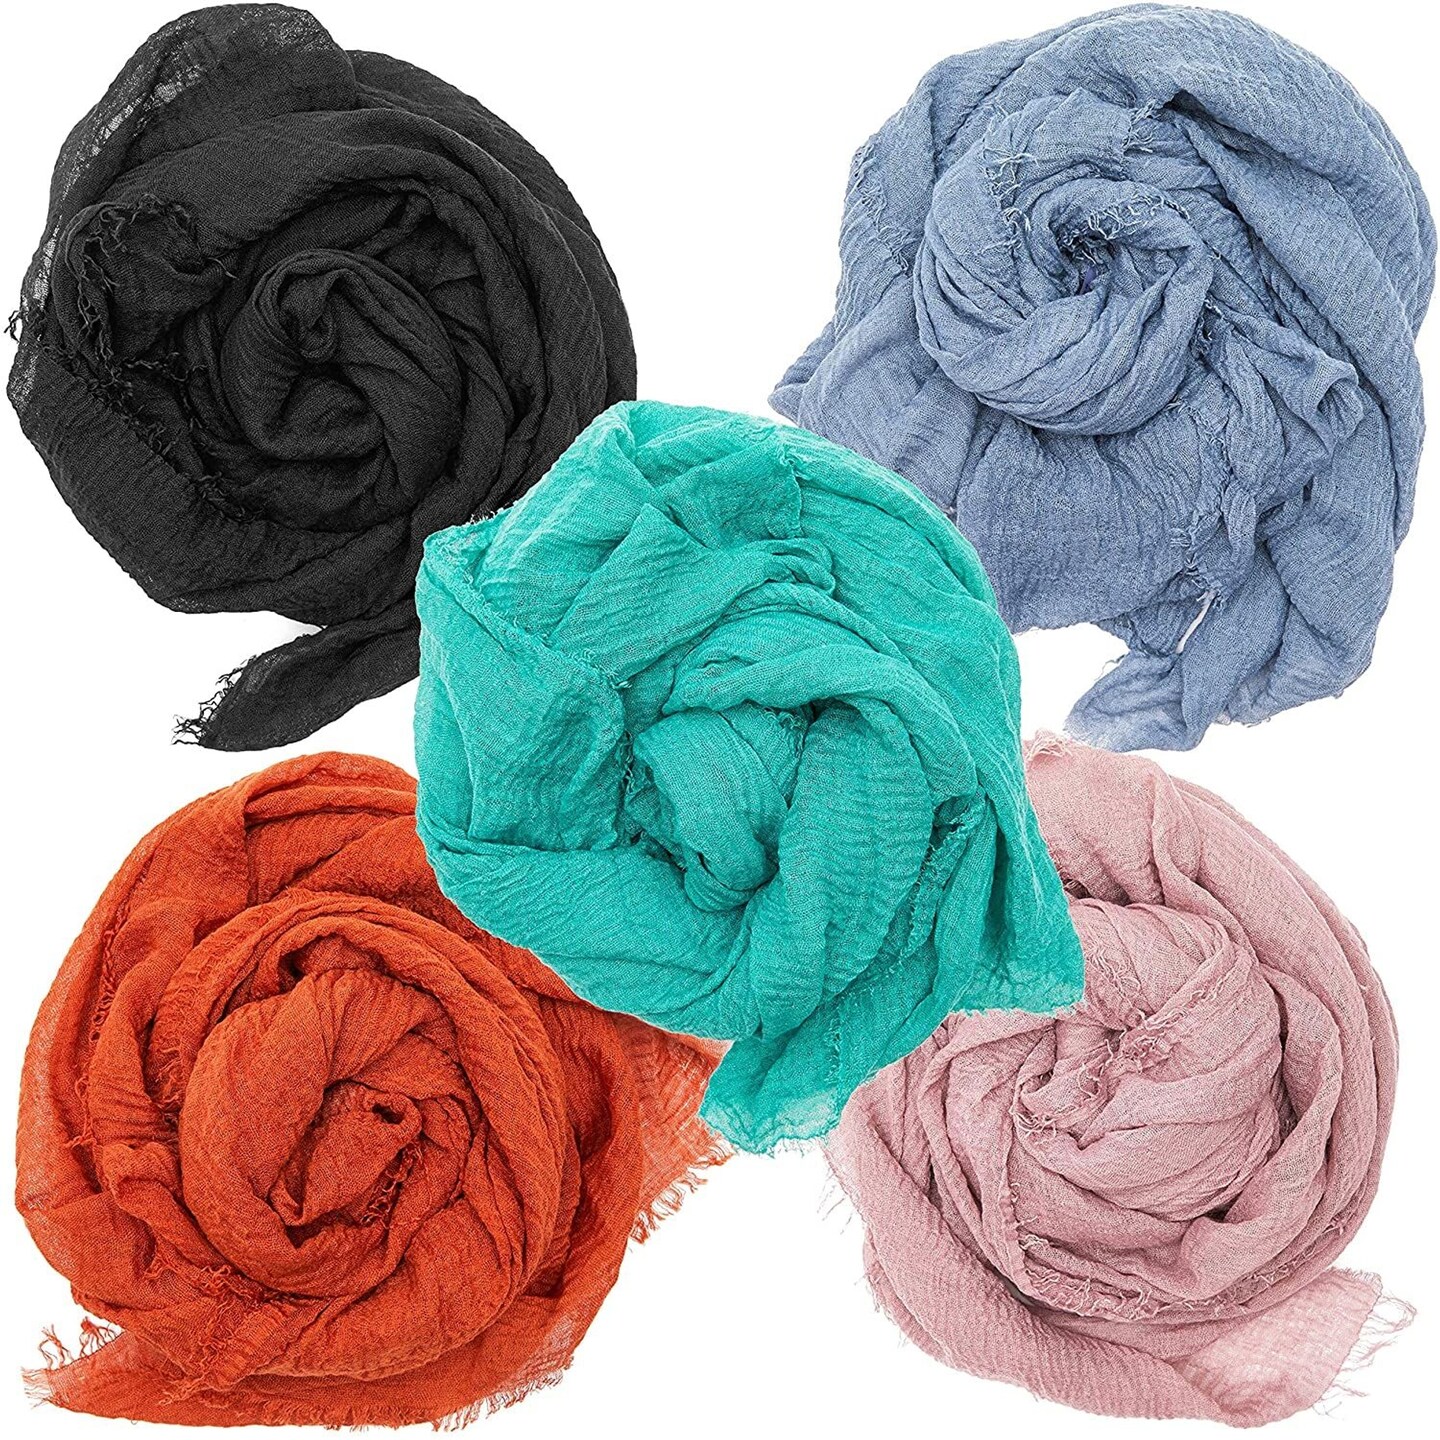 5-Pack Shawl Head Wrap, Hijab Scarf for Neck Hair, Scarf for Women in 5 Colors (70 x 36 inches)